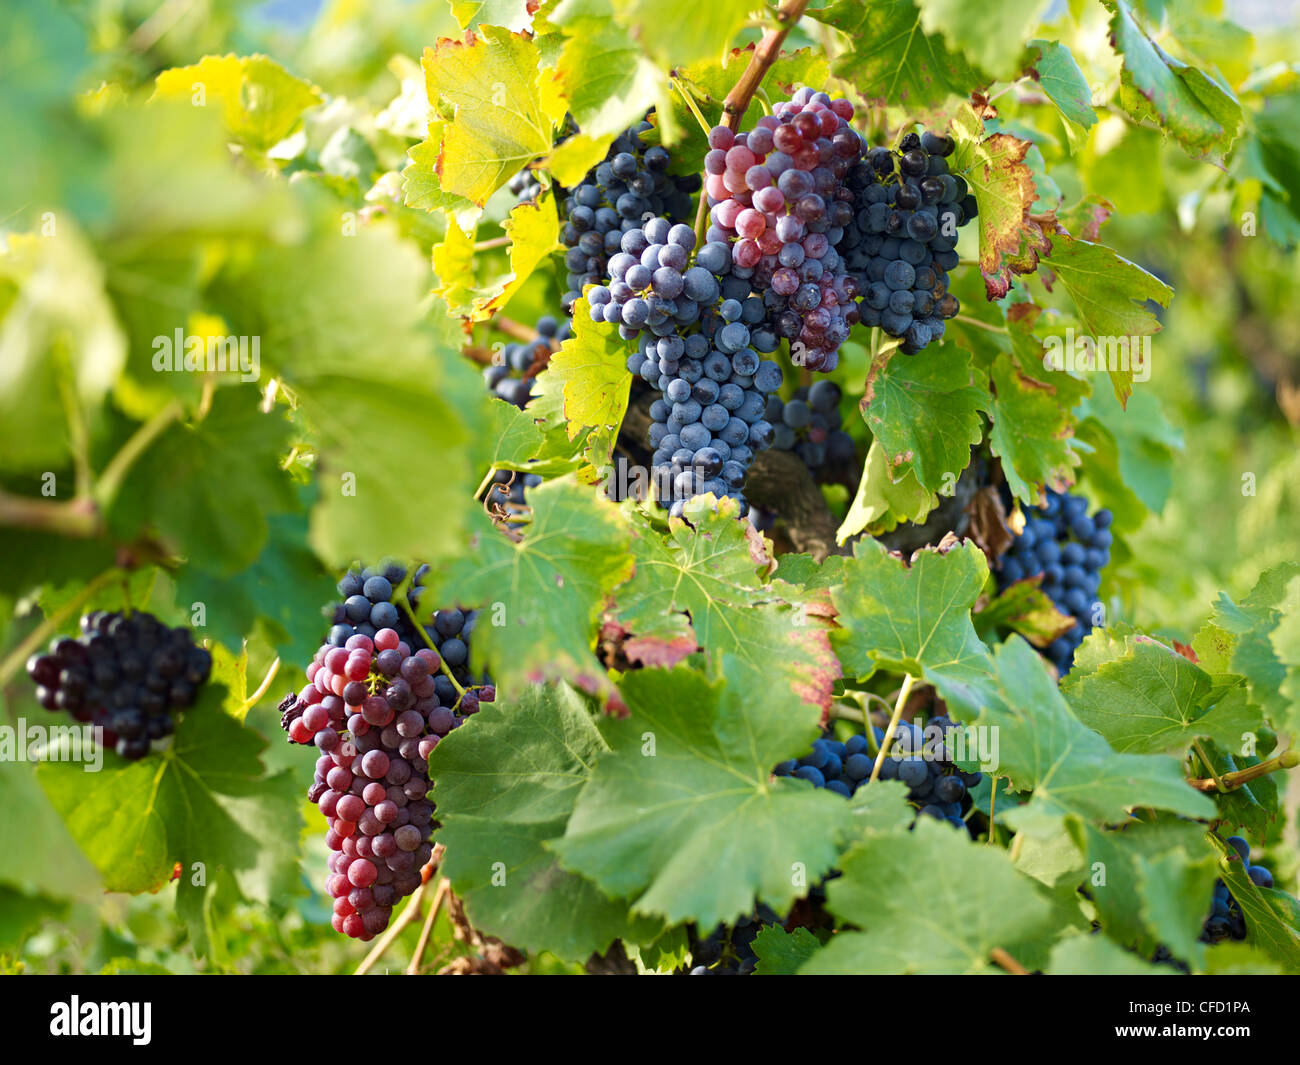 Grapes on vines, Languedoc Roussillon, France, Europe Stock Photo